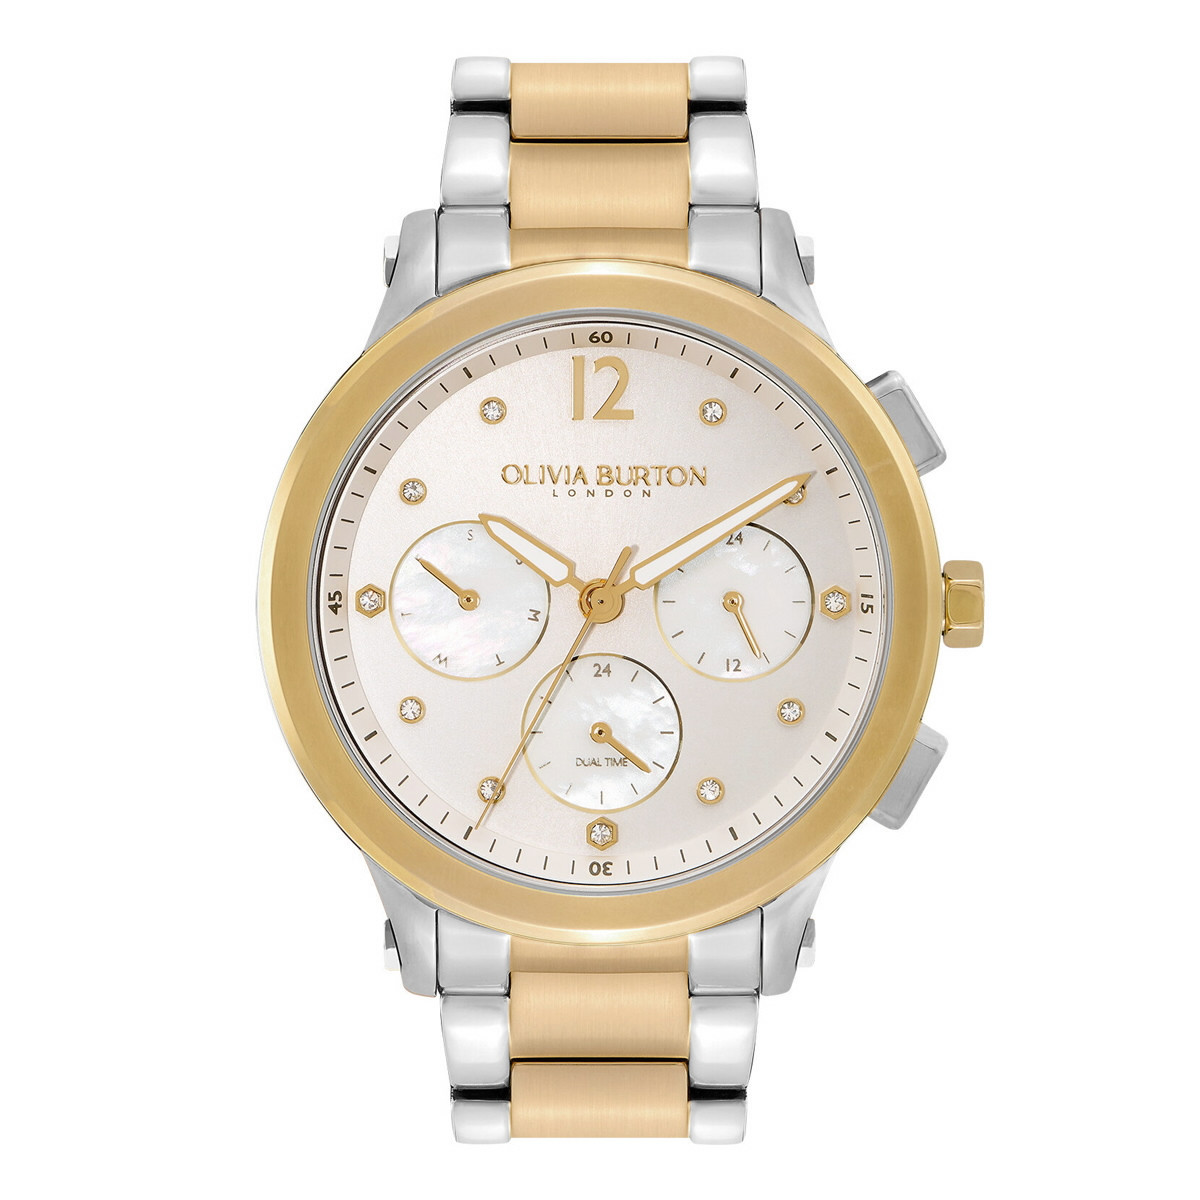 SPORTS LUXE WATCH